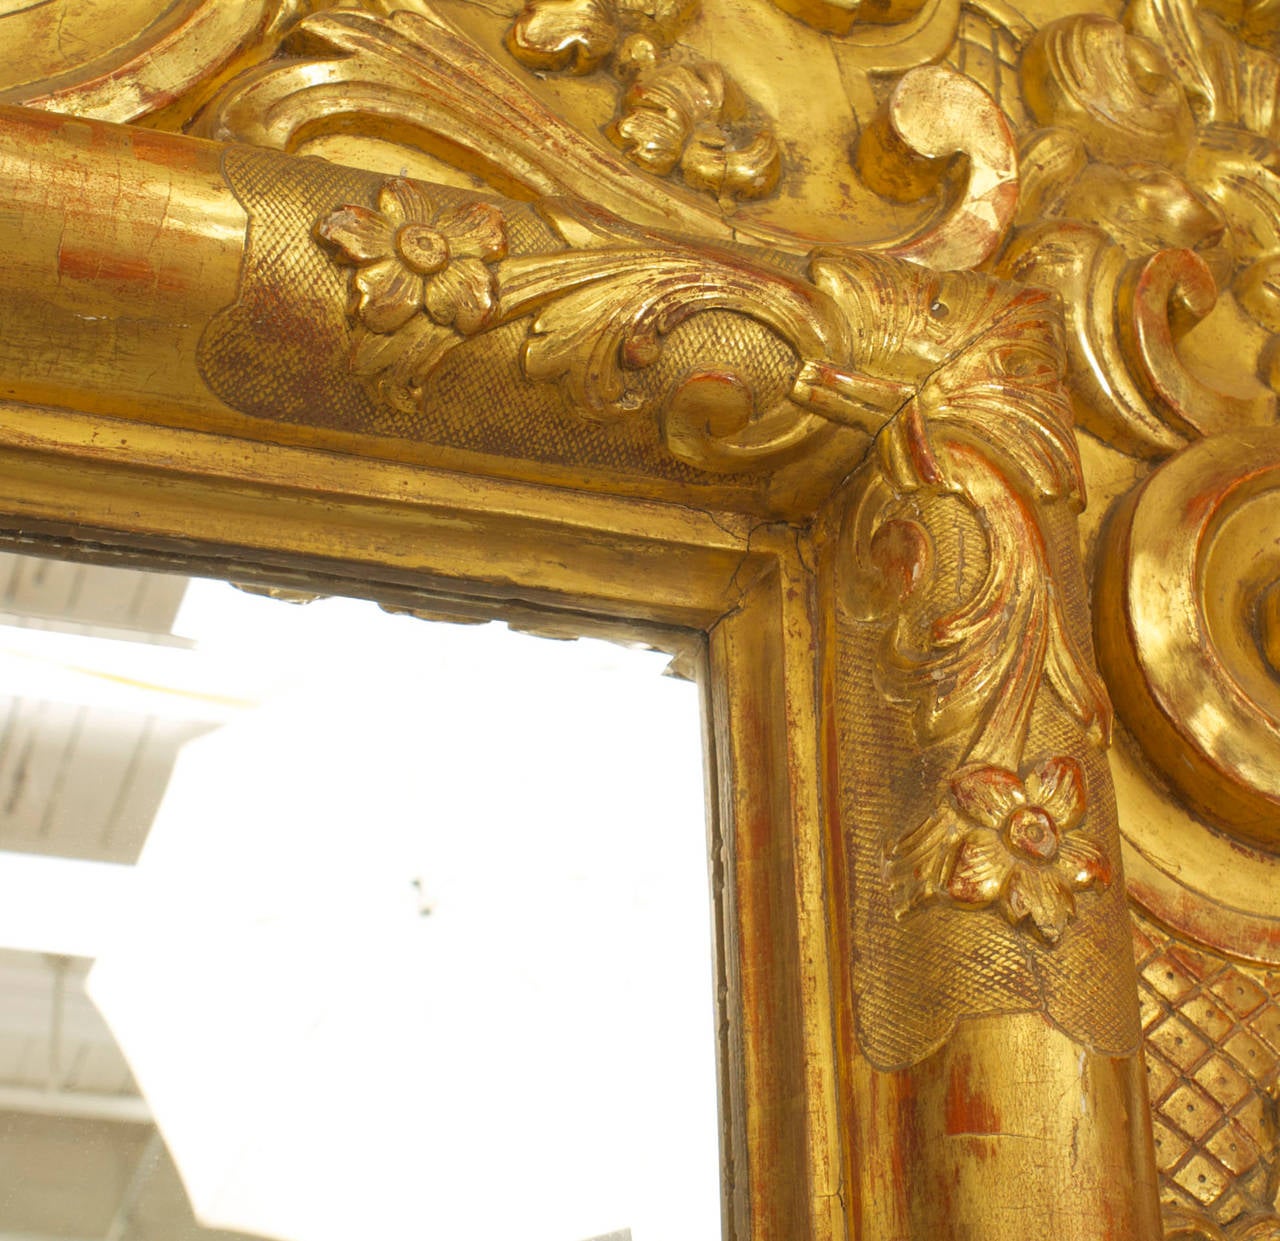 Italian Rococo (18th century) large, ornately carved giltwood wall mirror with a floral and scroll design frame with a pediment top featuring two cupid heads.
     